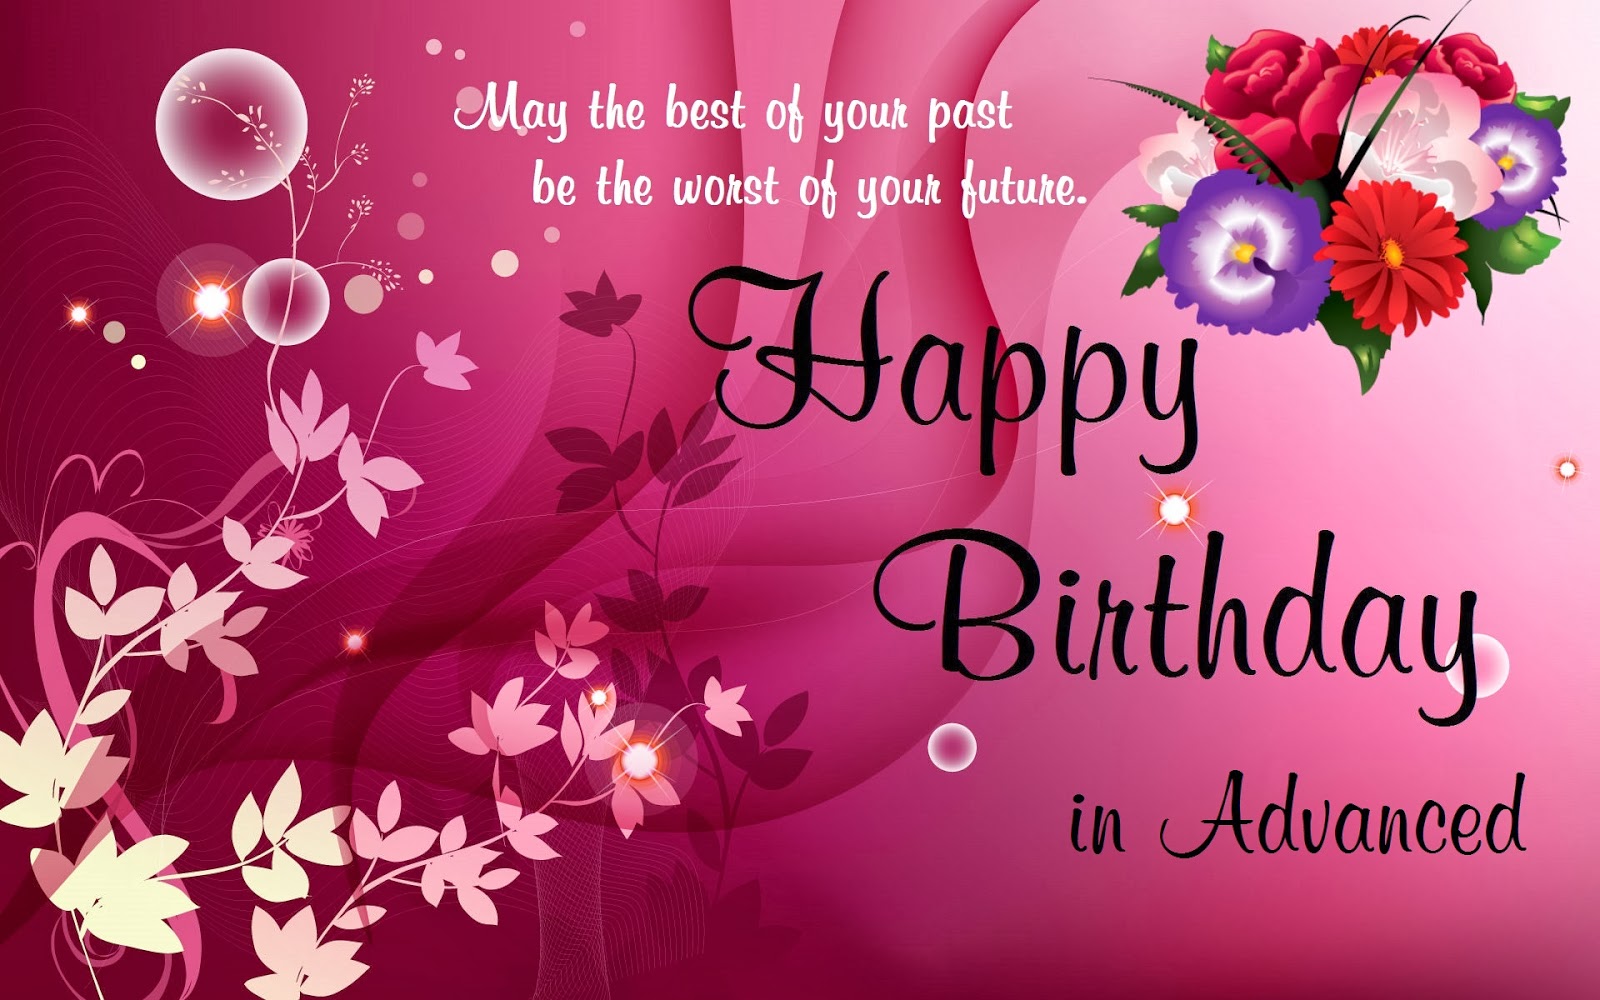 Happy Birthday Messages, wishes, images and Best Birthday Message